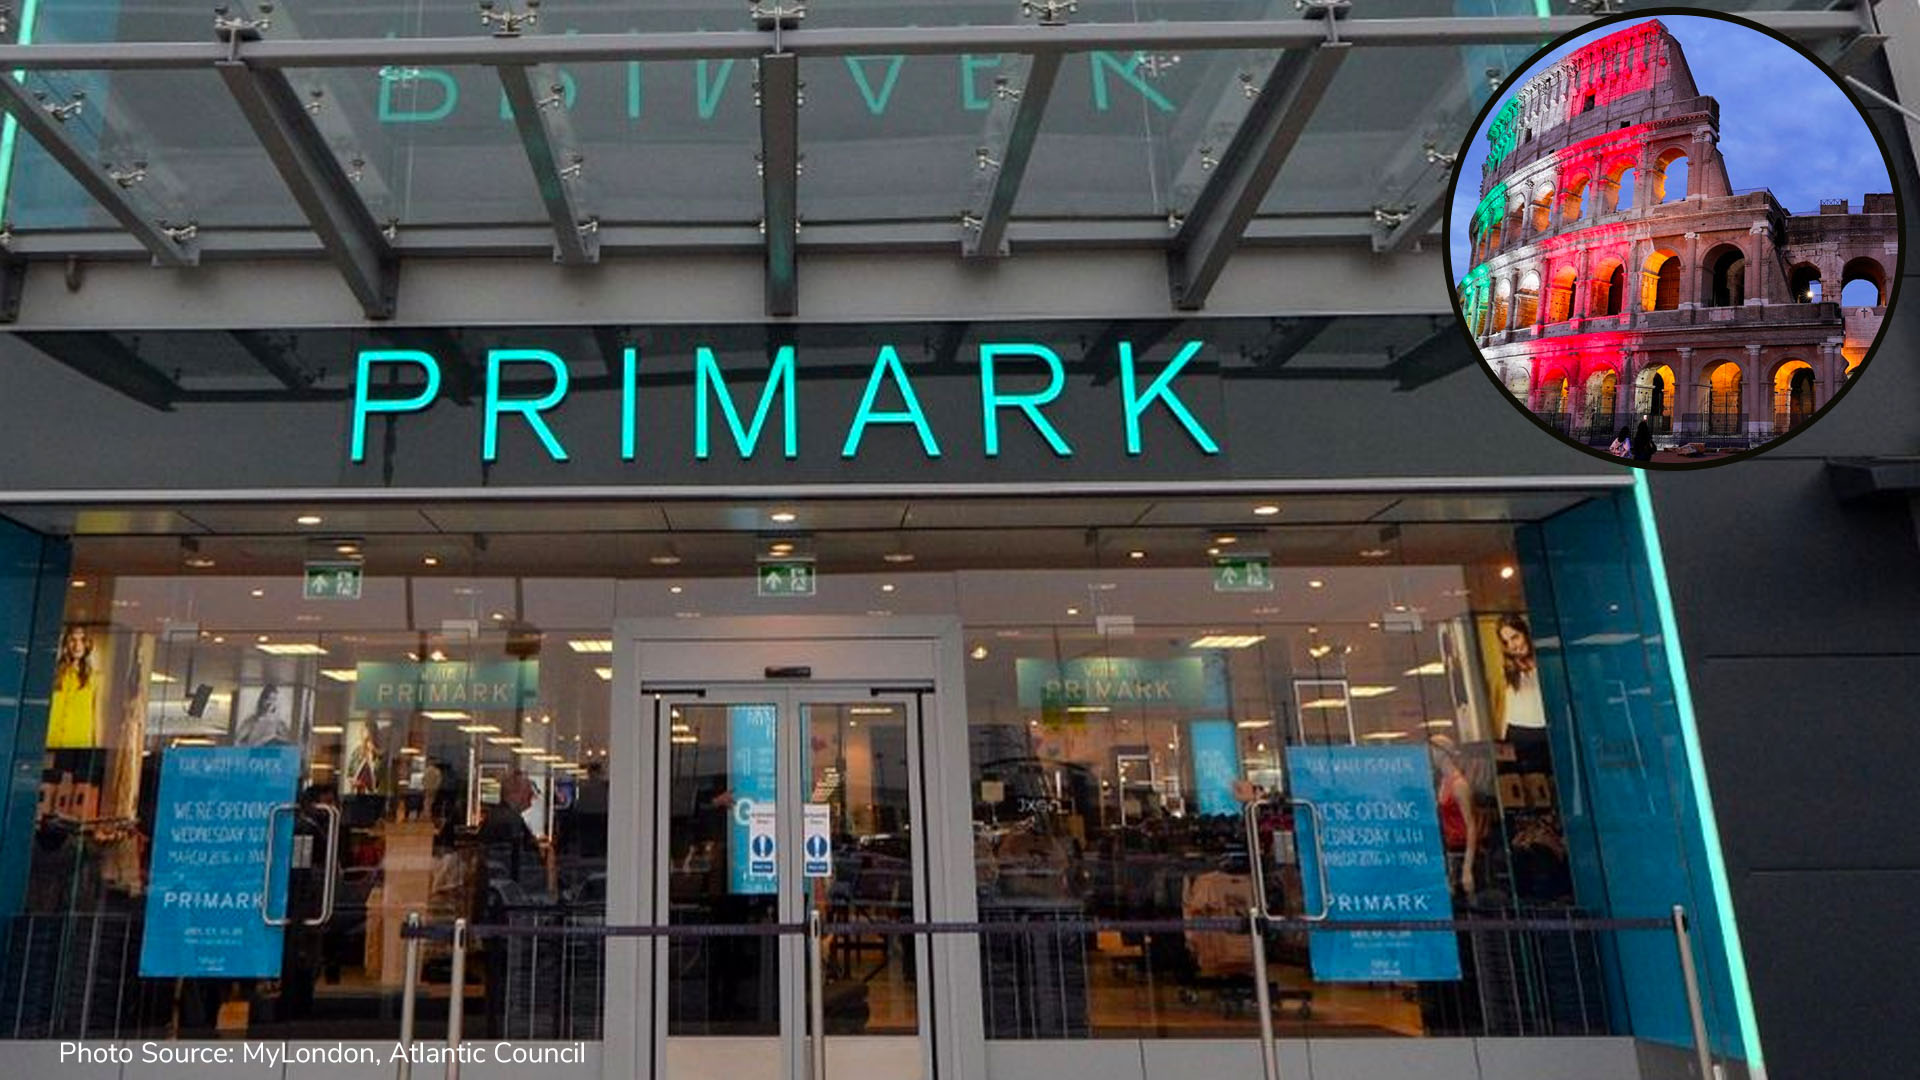 Primark to open 9 new stores in Italy by 2022